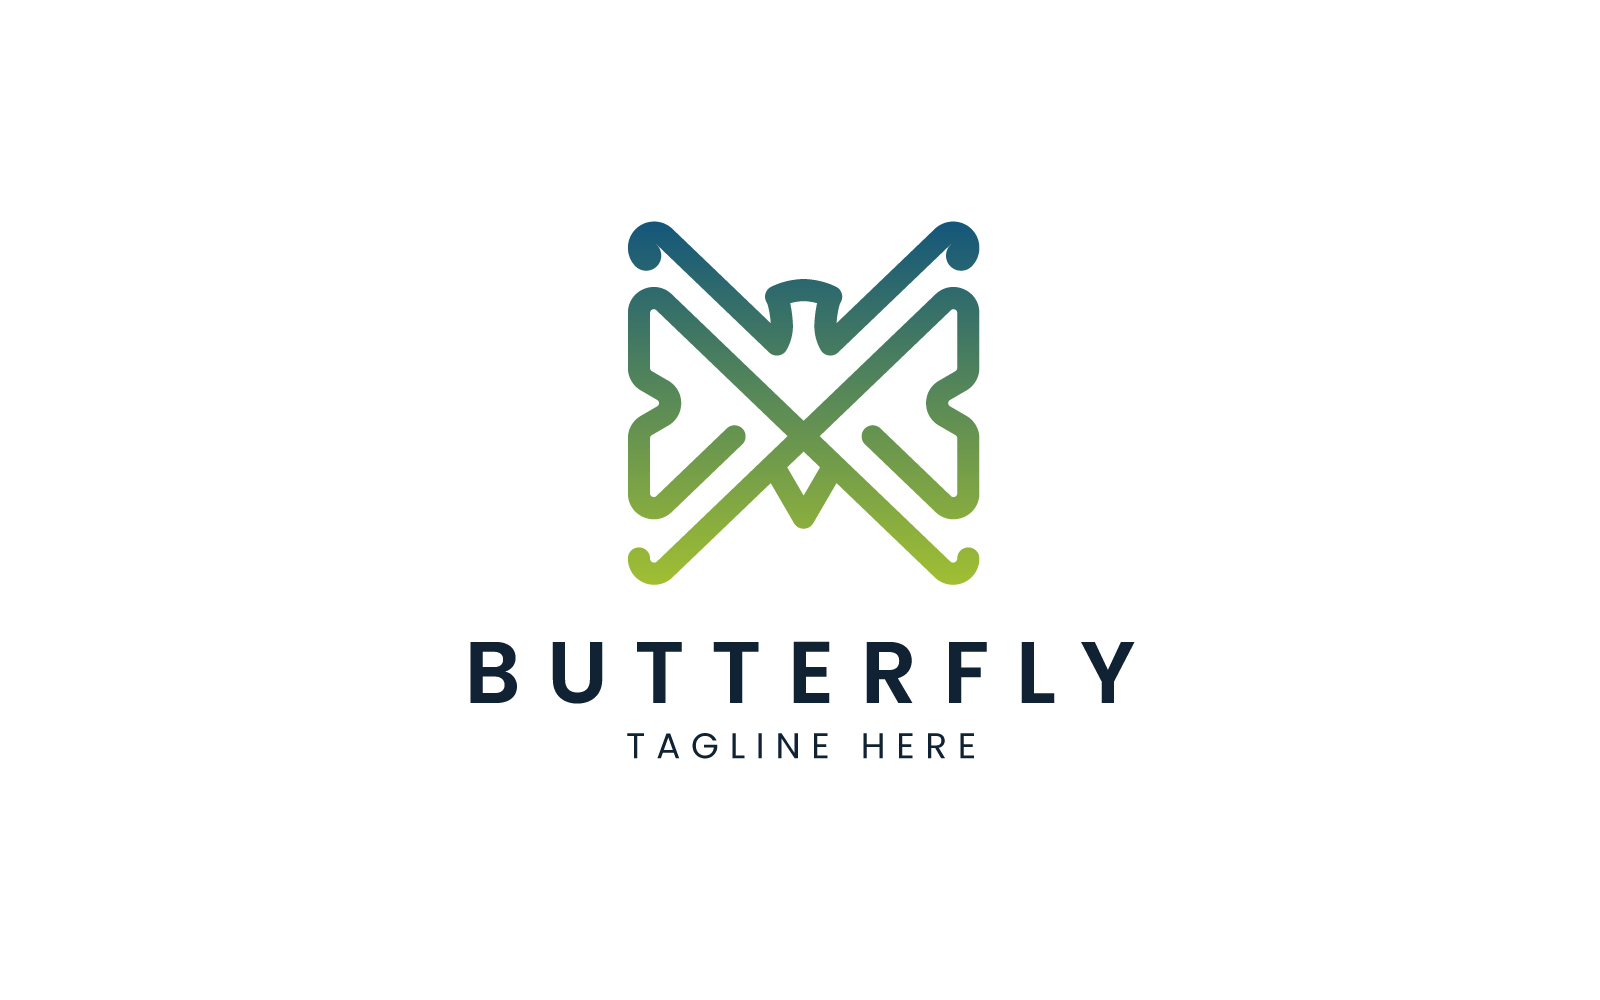 Butterfly Logo Design Template For Your Project